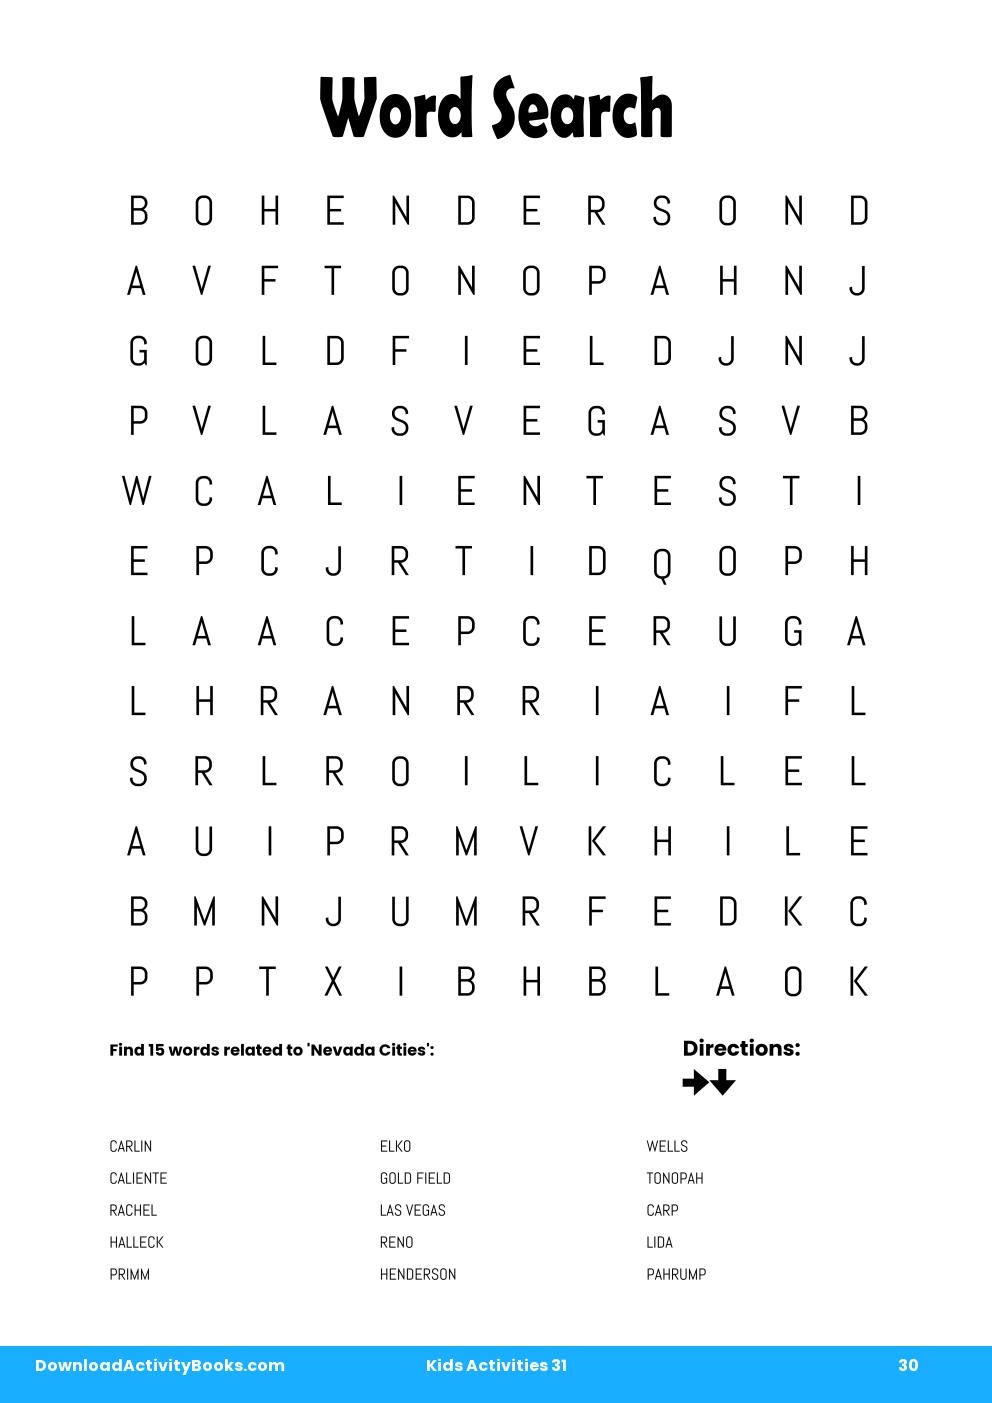 Word Search in Kids Activities 31